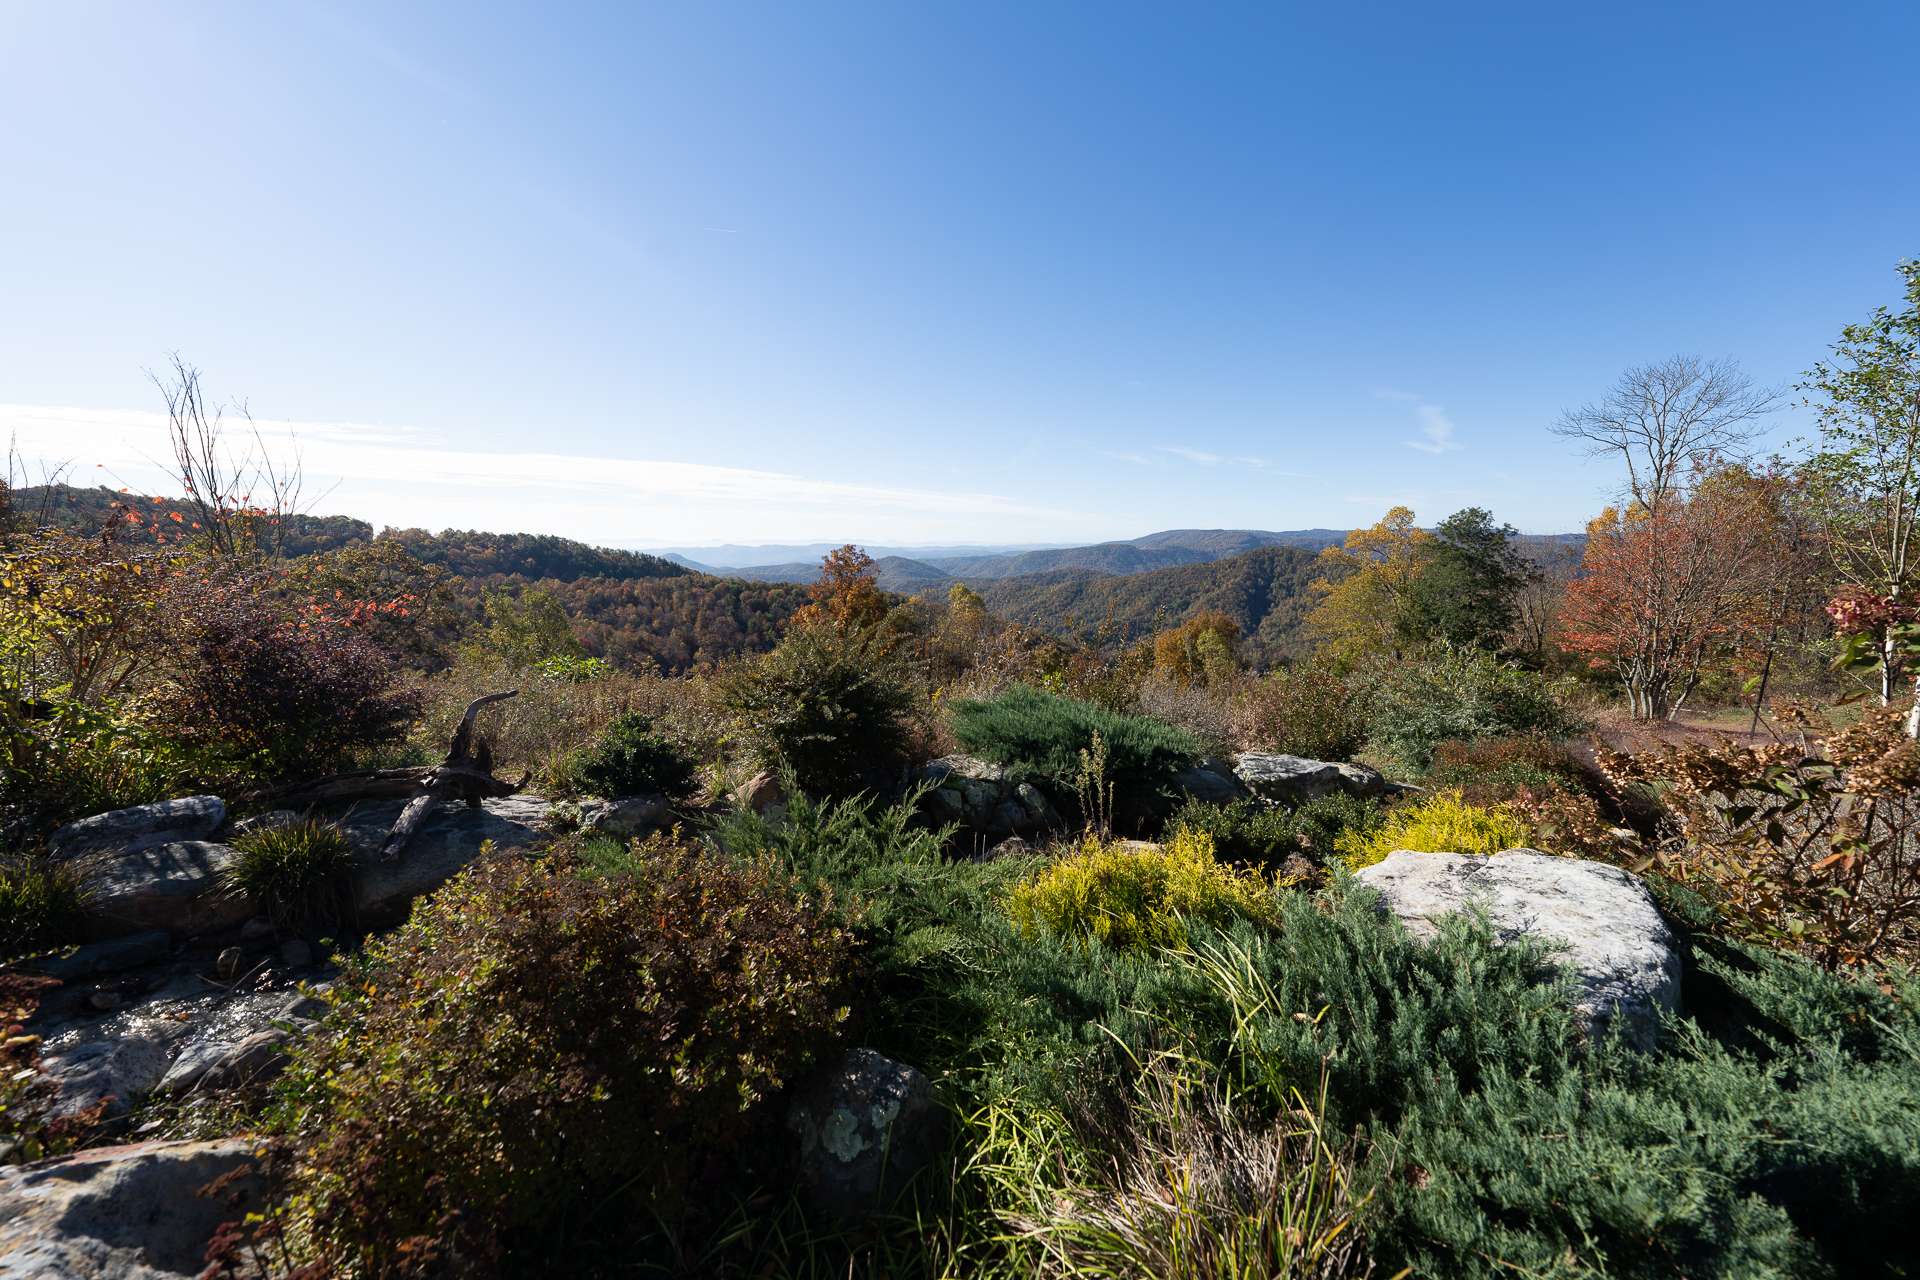 Here you will find natural rock outcroppings enhanced by beautiful perennials and native mountain foliage.